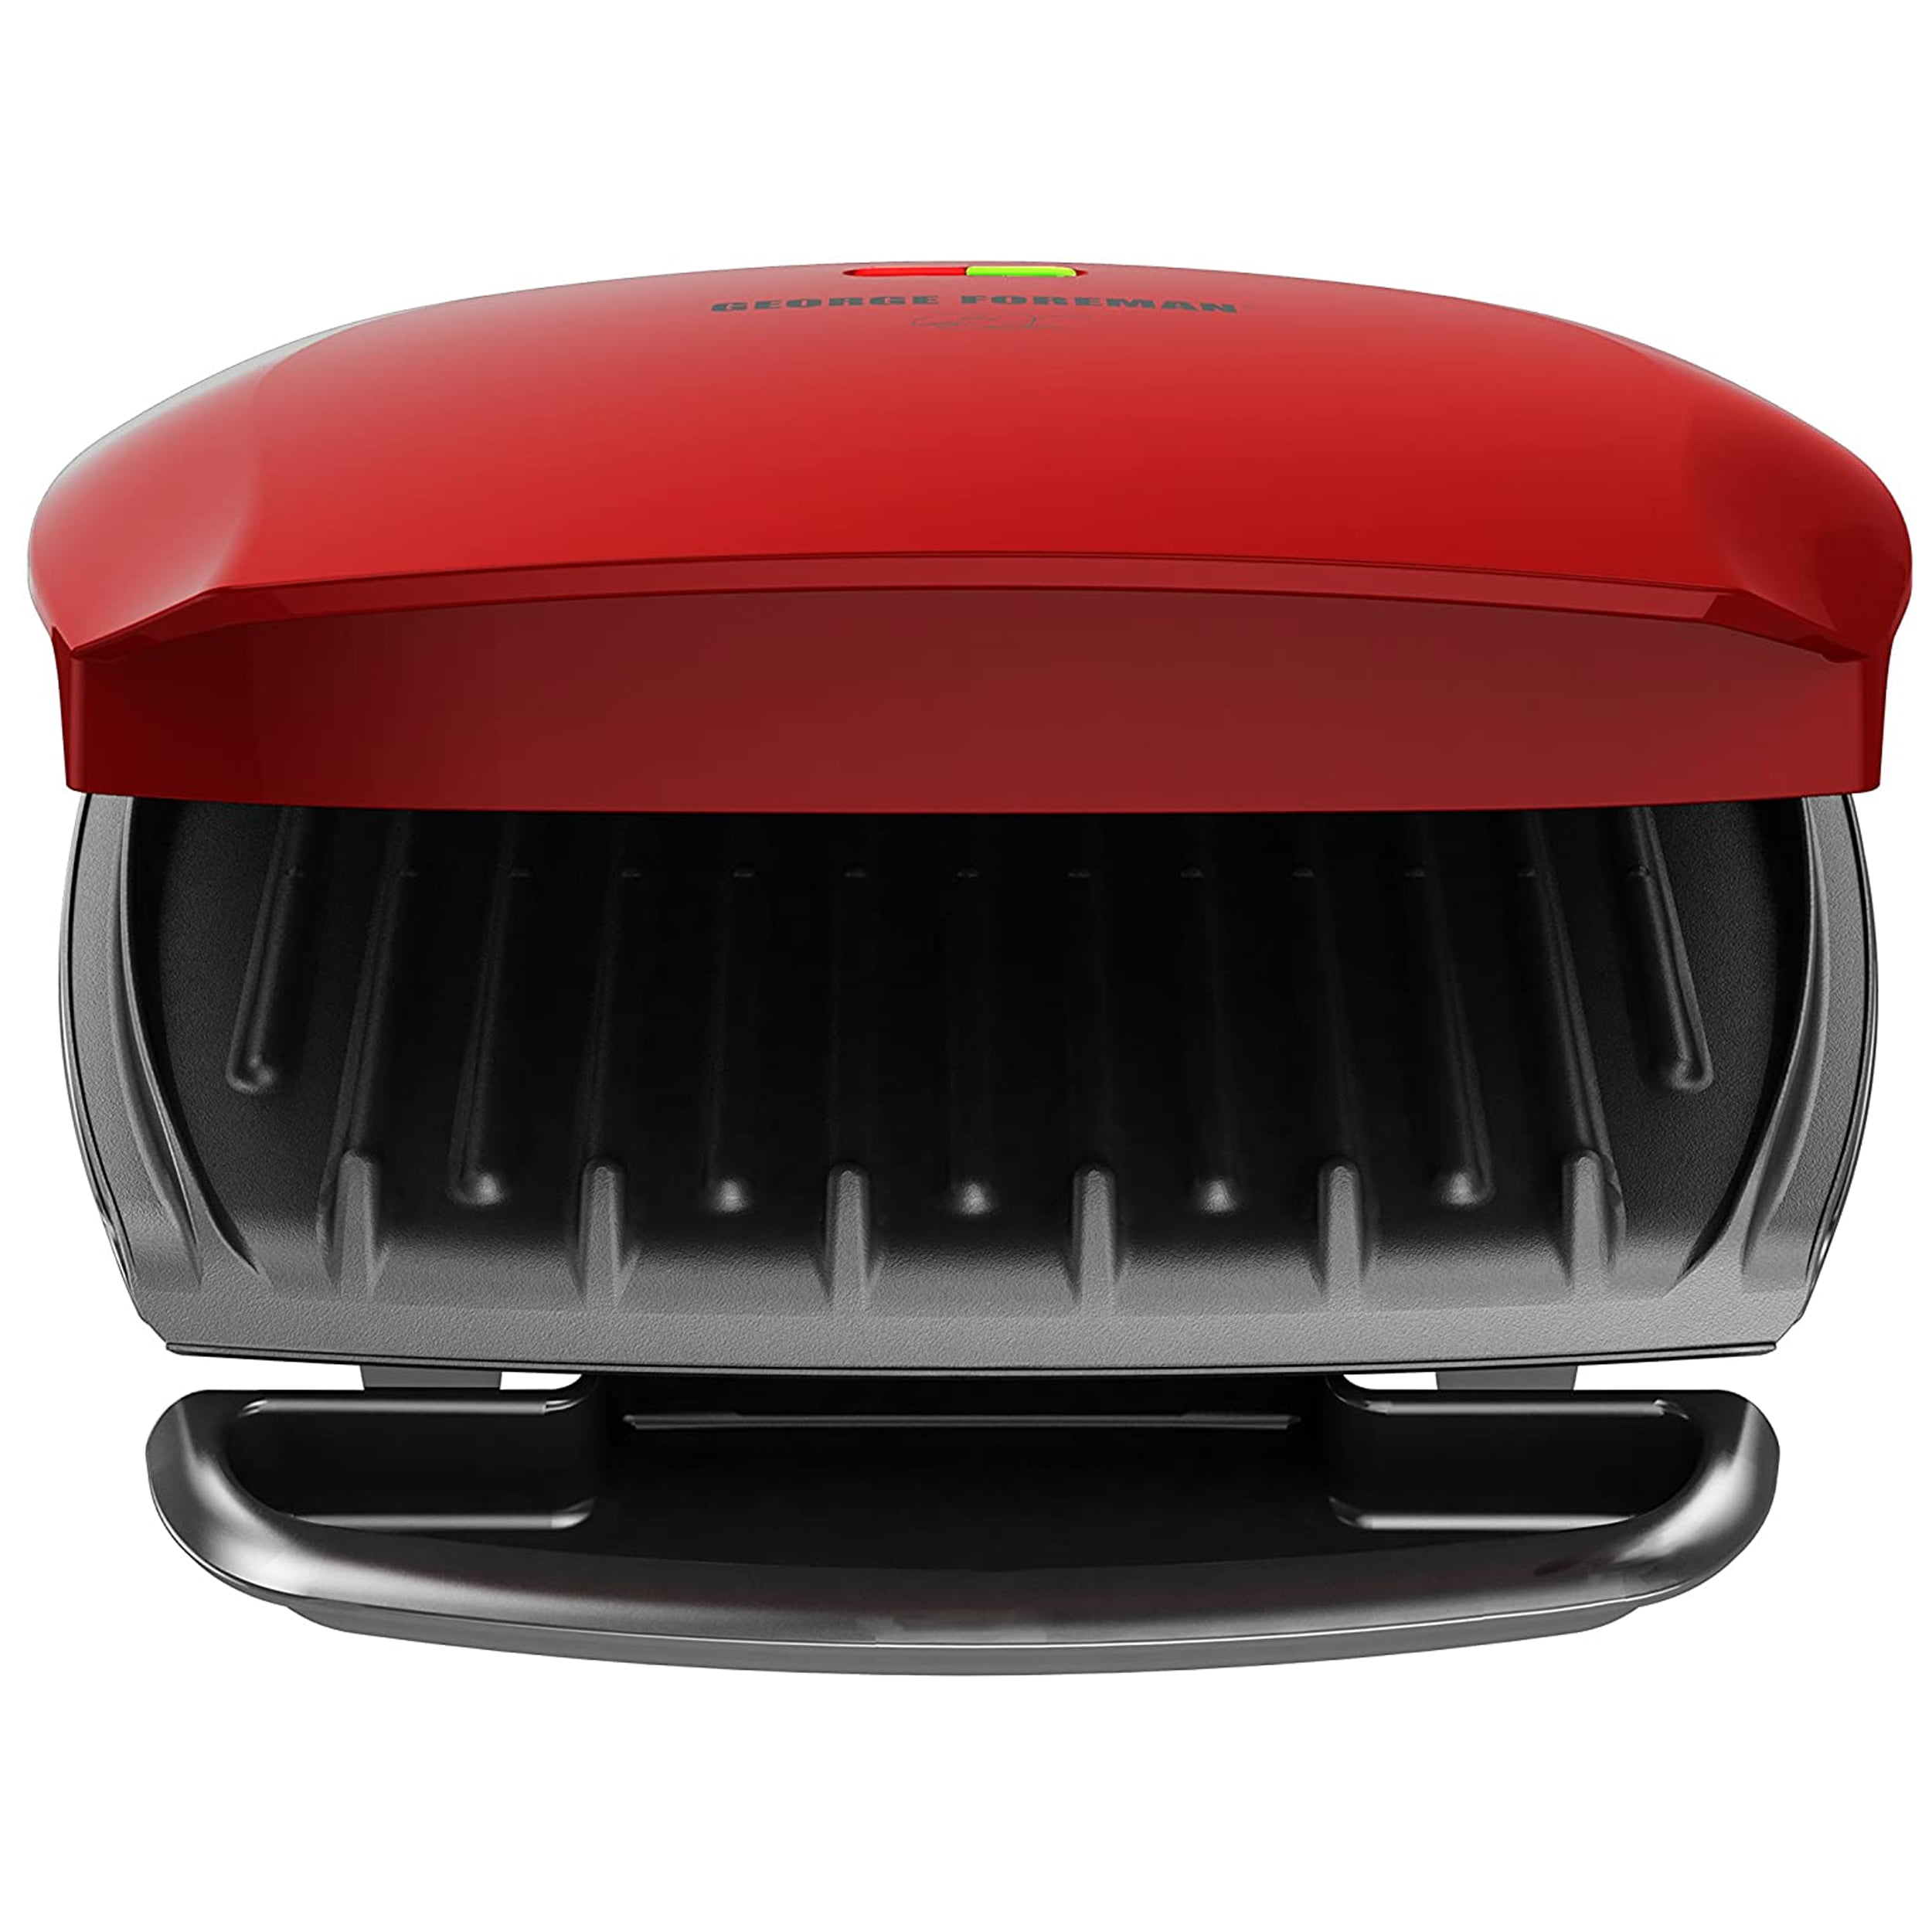 George Foreman 5-Serving 6-in-1 Grill & Broil with Nonstick Plates 